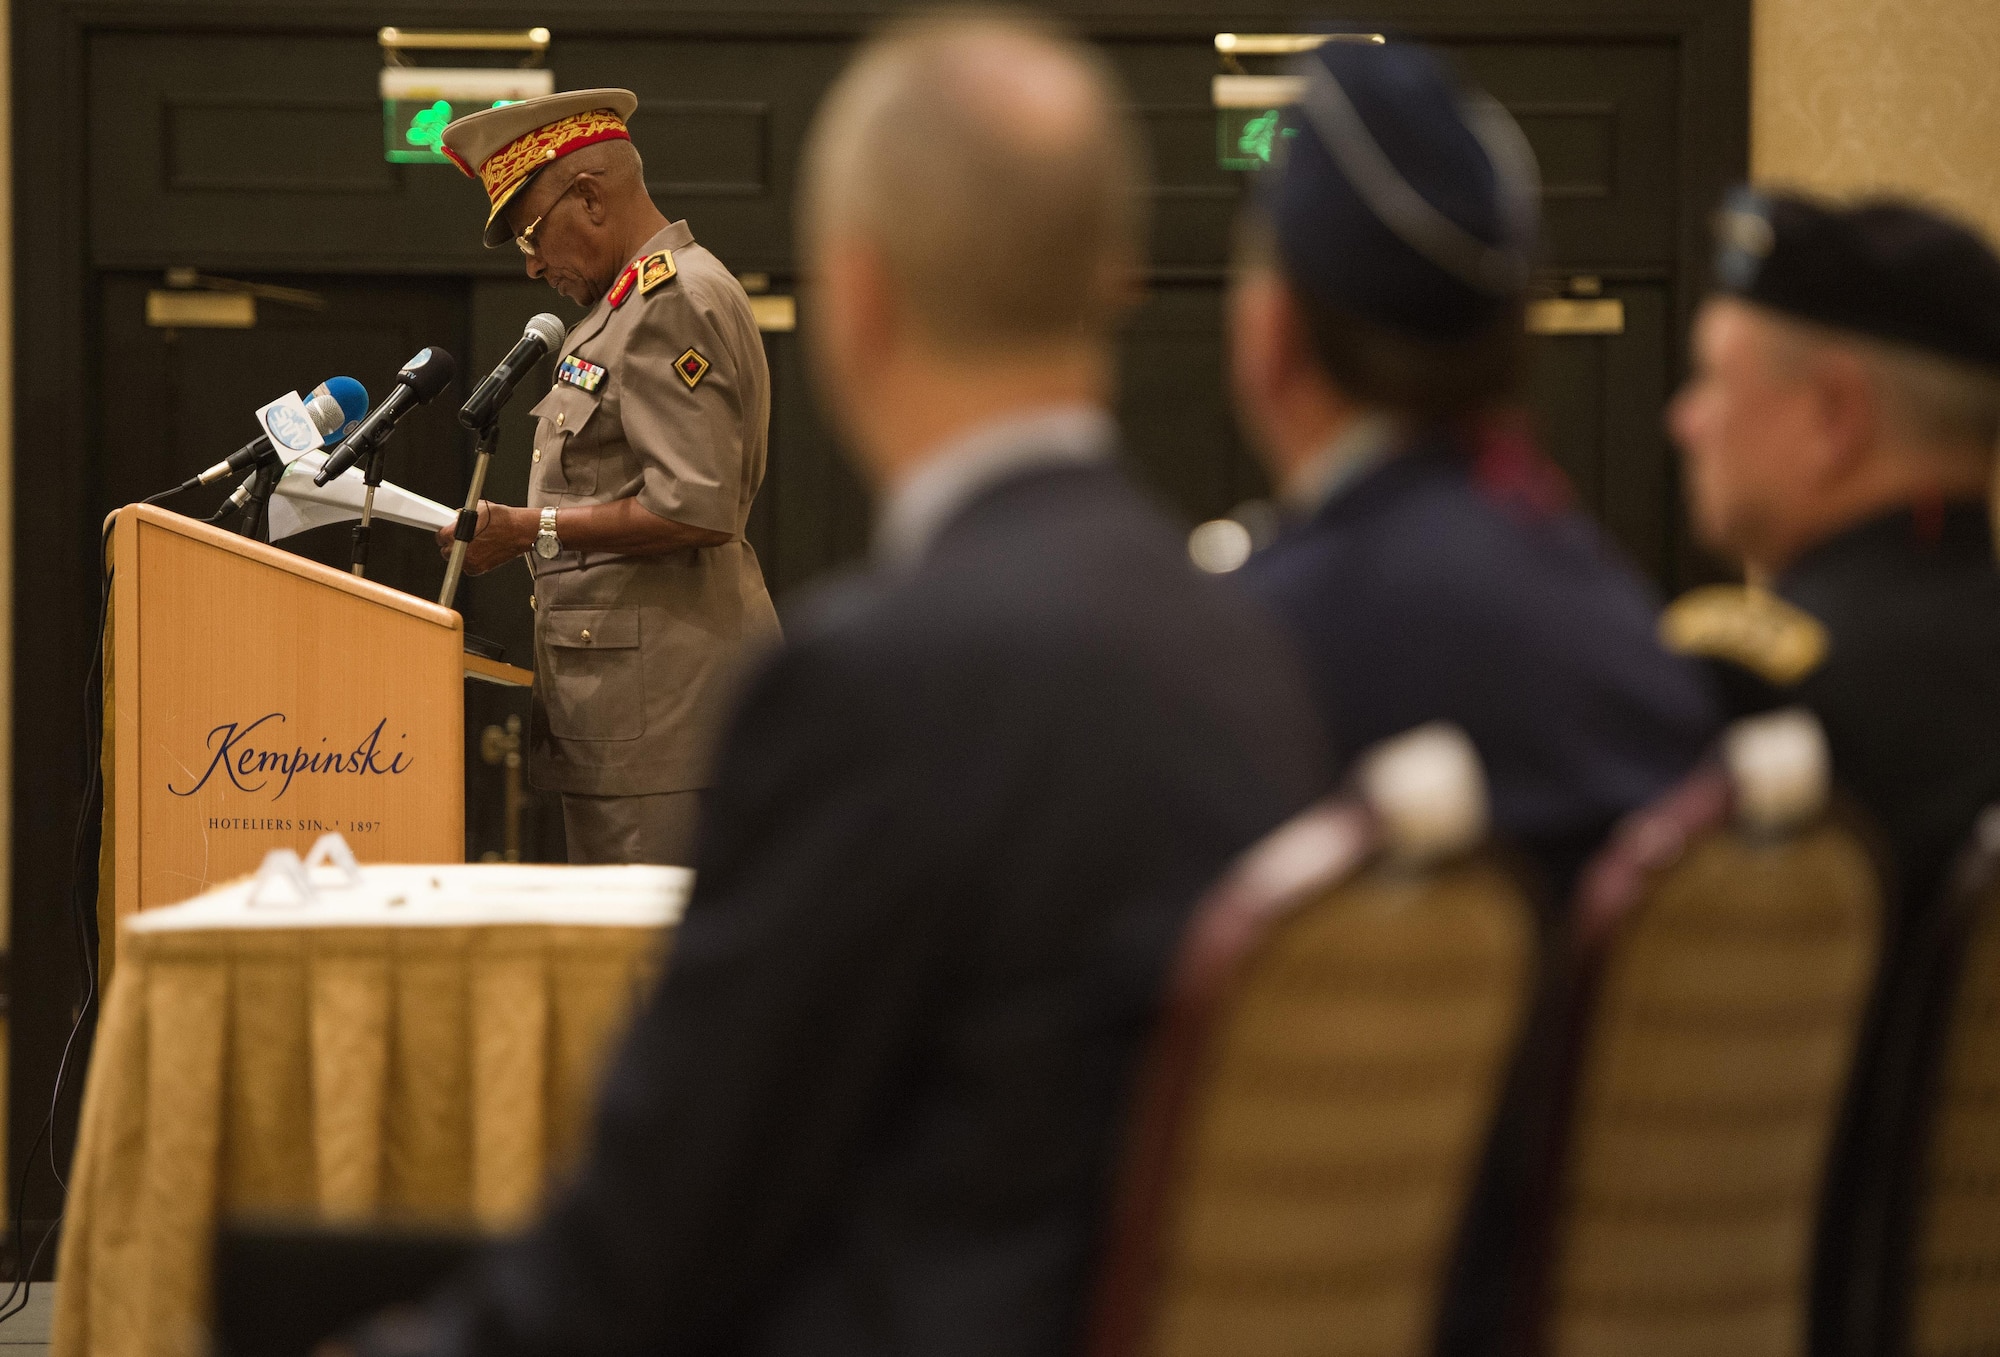 Maj. Gen. Zakaria Cheik Ibrahim, the Djiboutian Armed Forces (FAD) chief of defense, speaks at the Kentucky National Guard and FAD State Partnership Program agreement signing ceremony at the Kempinski Hotel, Djibouti, June 2, 2015. Zakaria spoke about the strong partnership between the U.S. and Djibouti that began with both countries’ commitment to fight terrorism after 9/11, which led to the American presence at Camp Lemonnier, Djibouti. (U.S. Air Force photo/Staff Sgt. Nathan Maysonet)